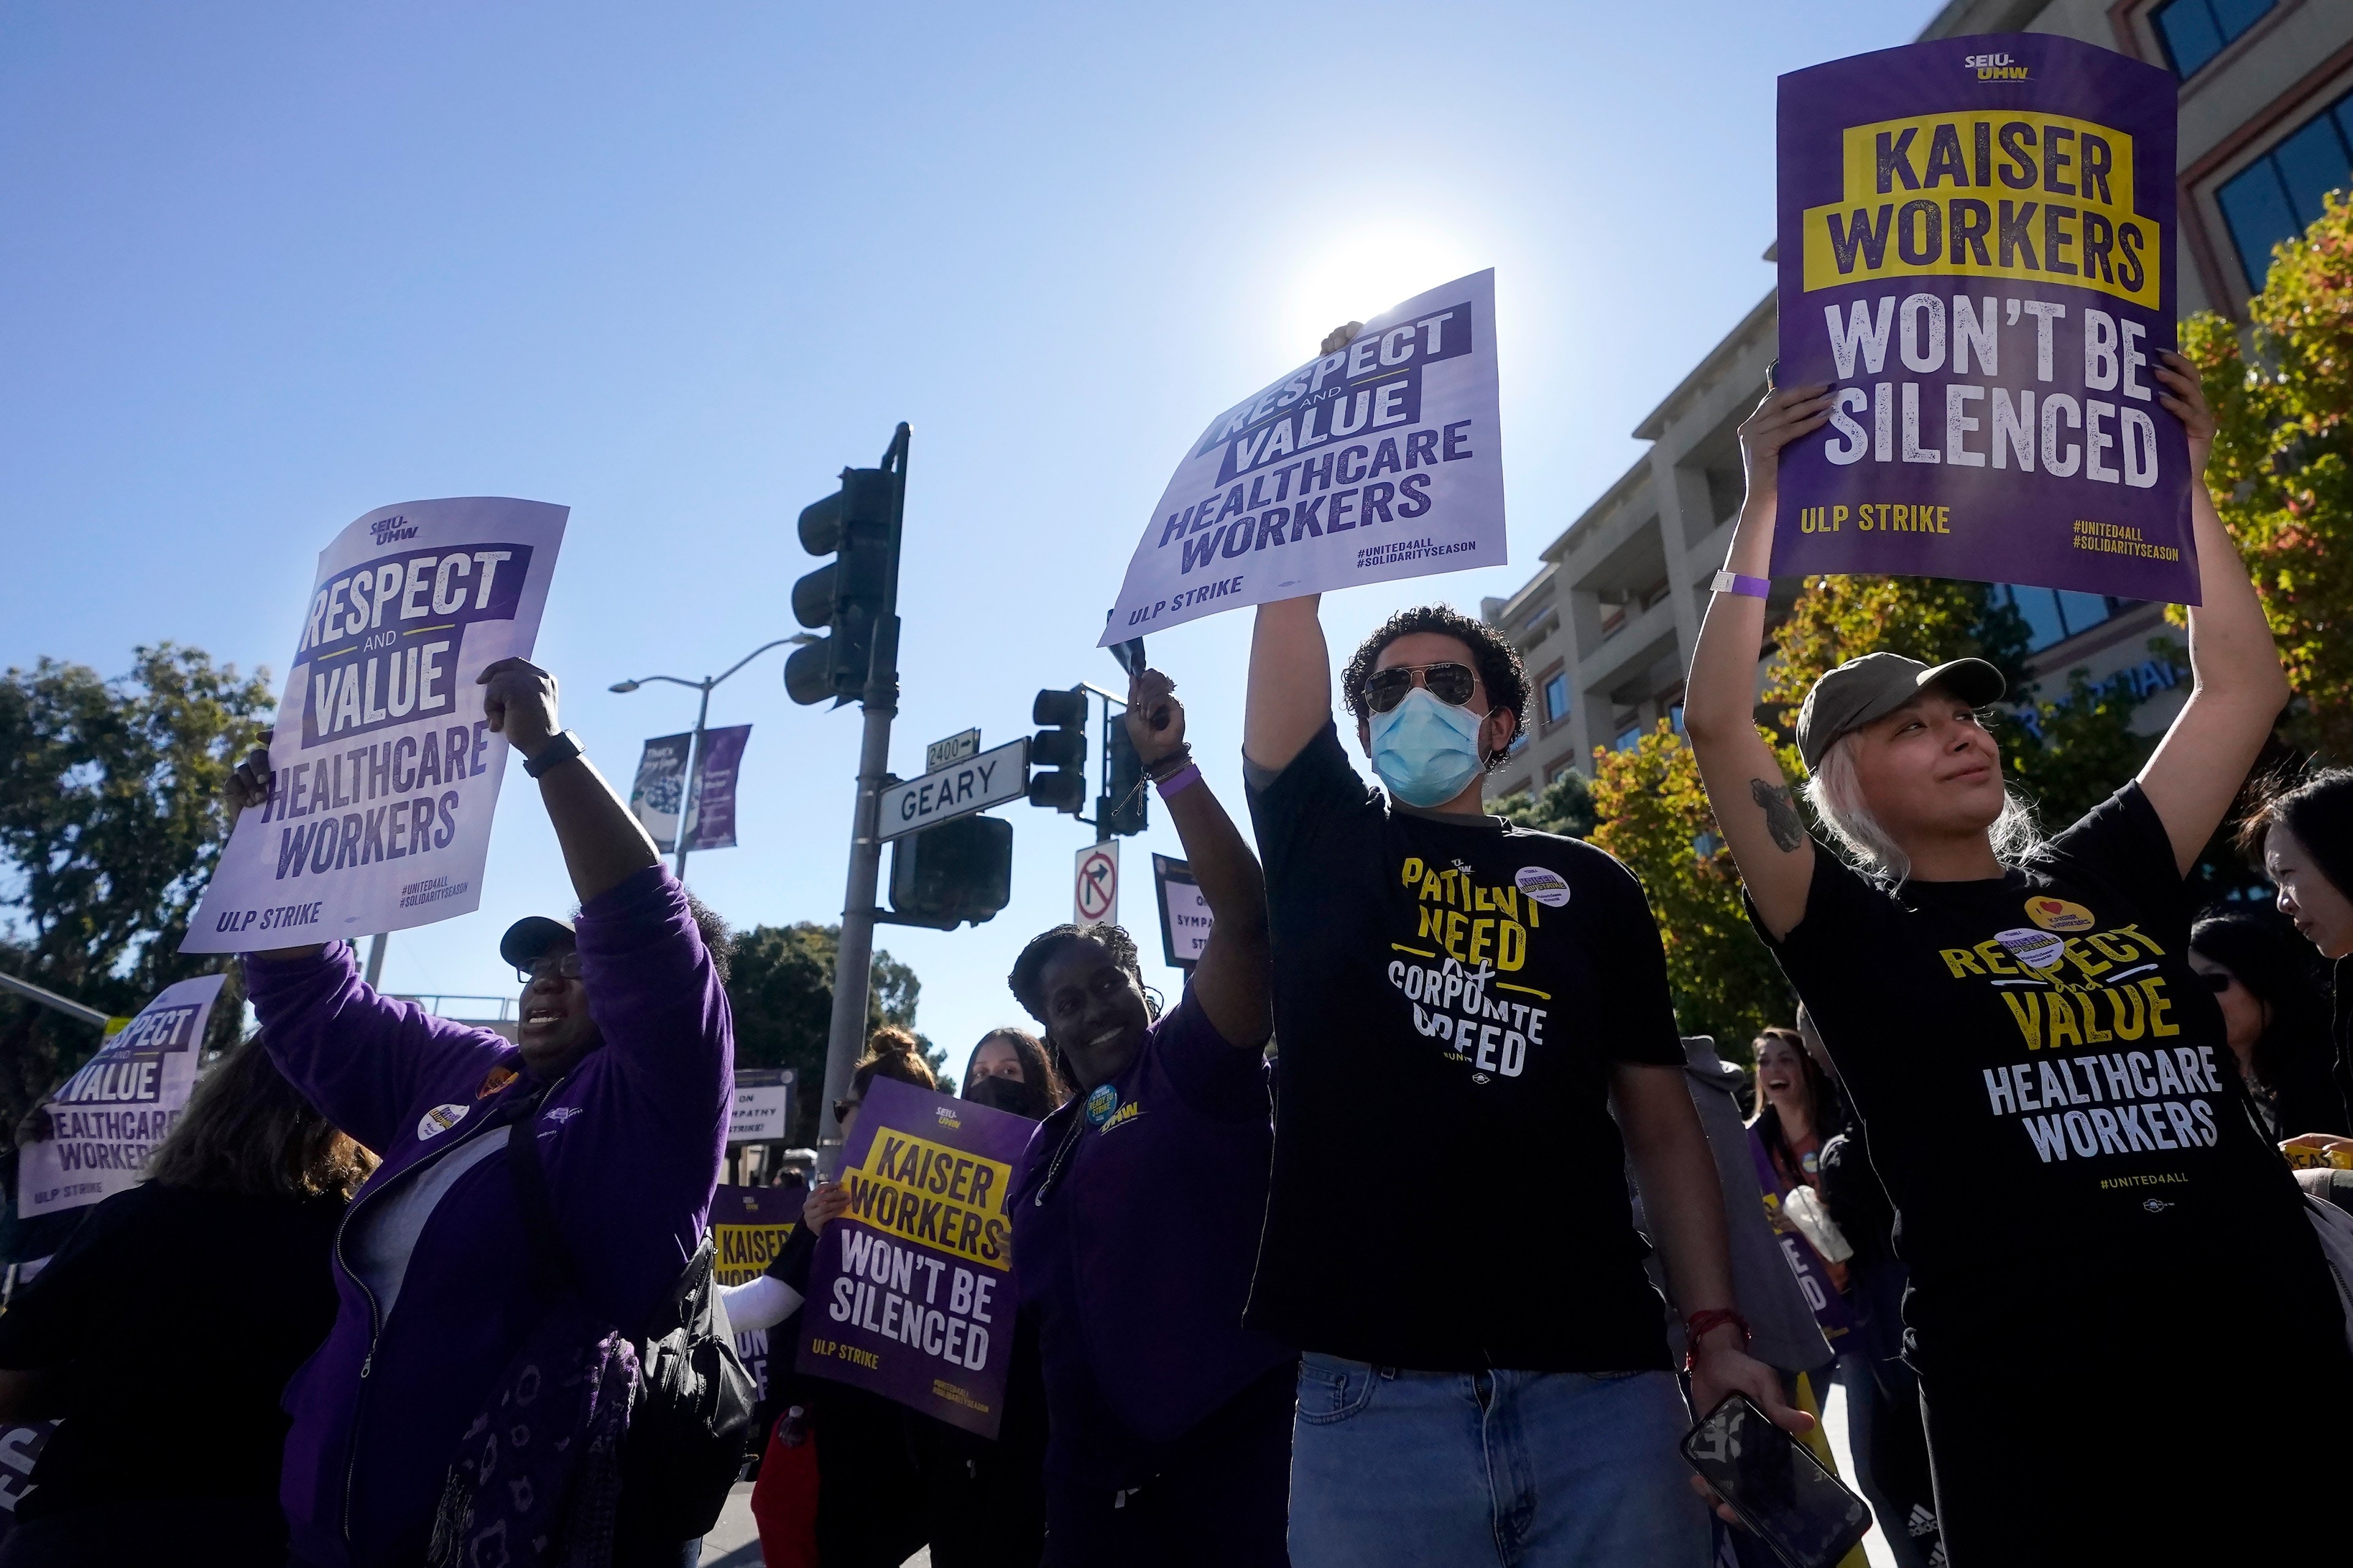 A group of union employees, some wearing masks and sunglasses, hold signs at a public protest.